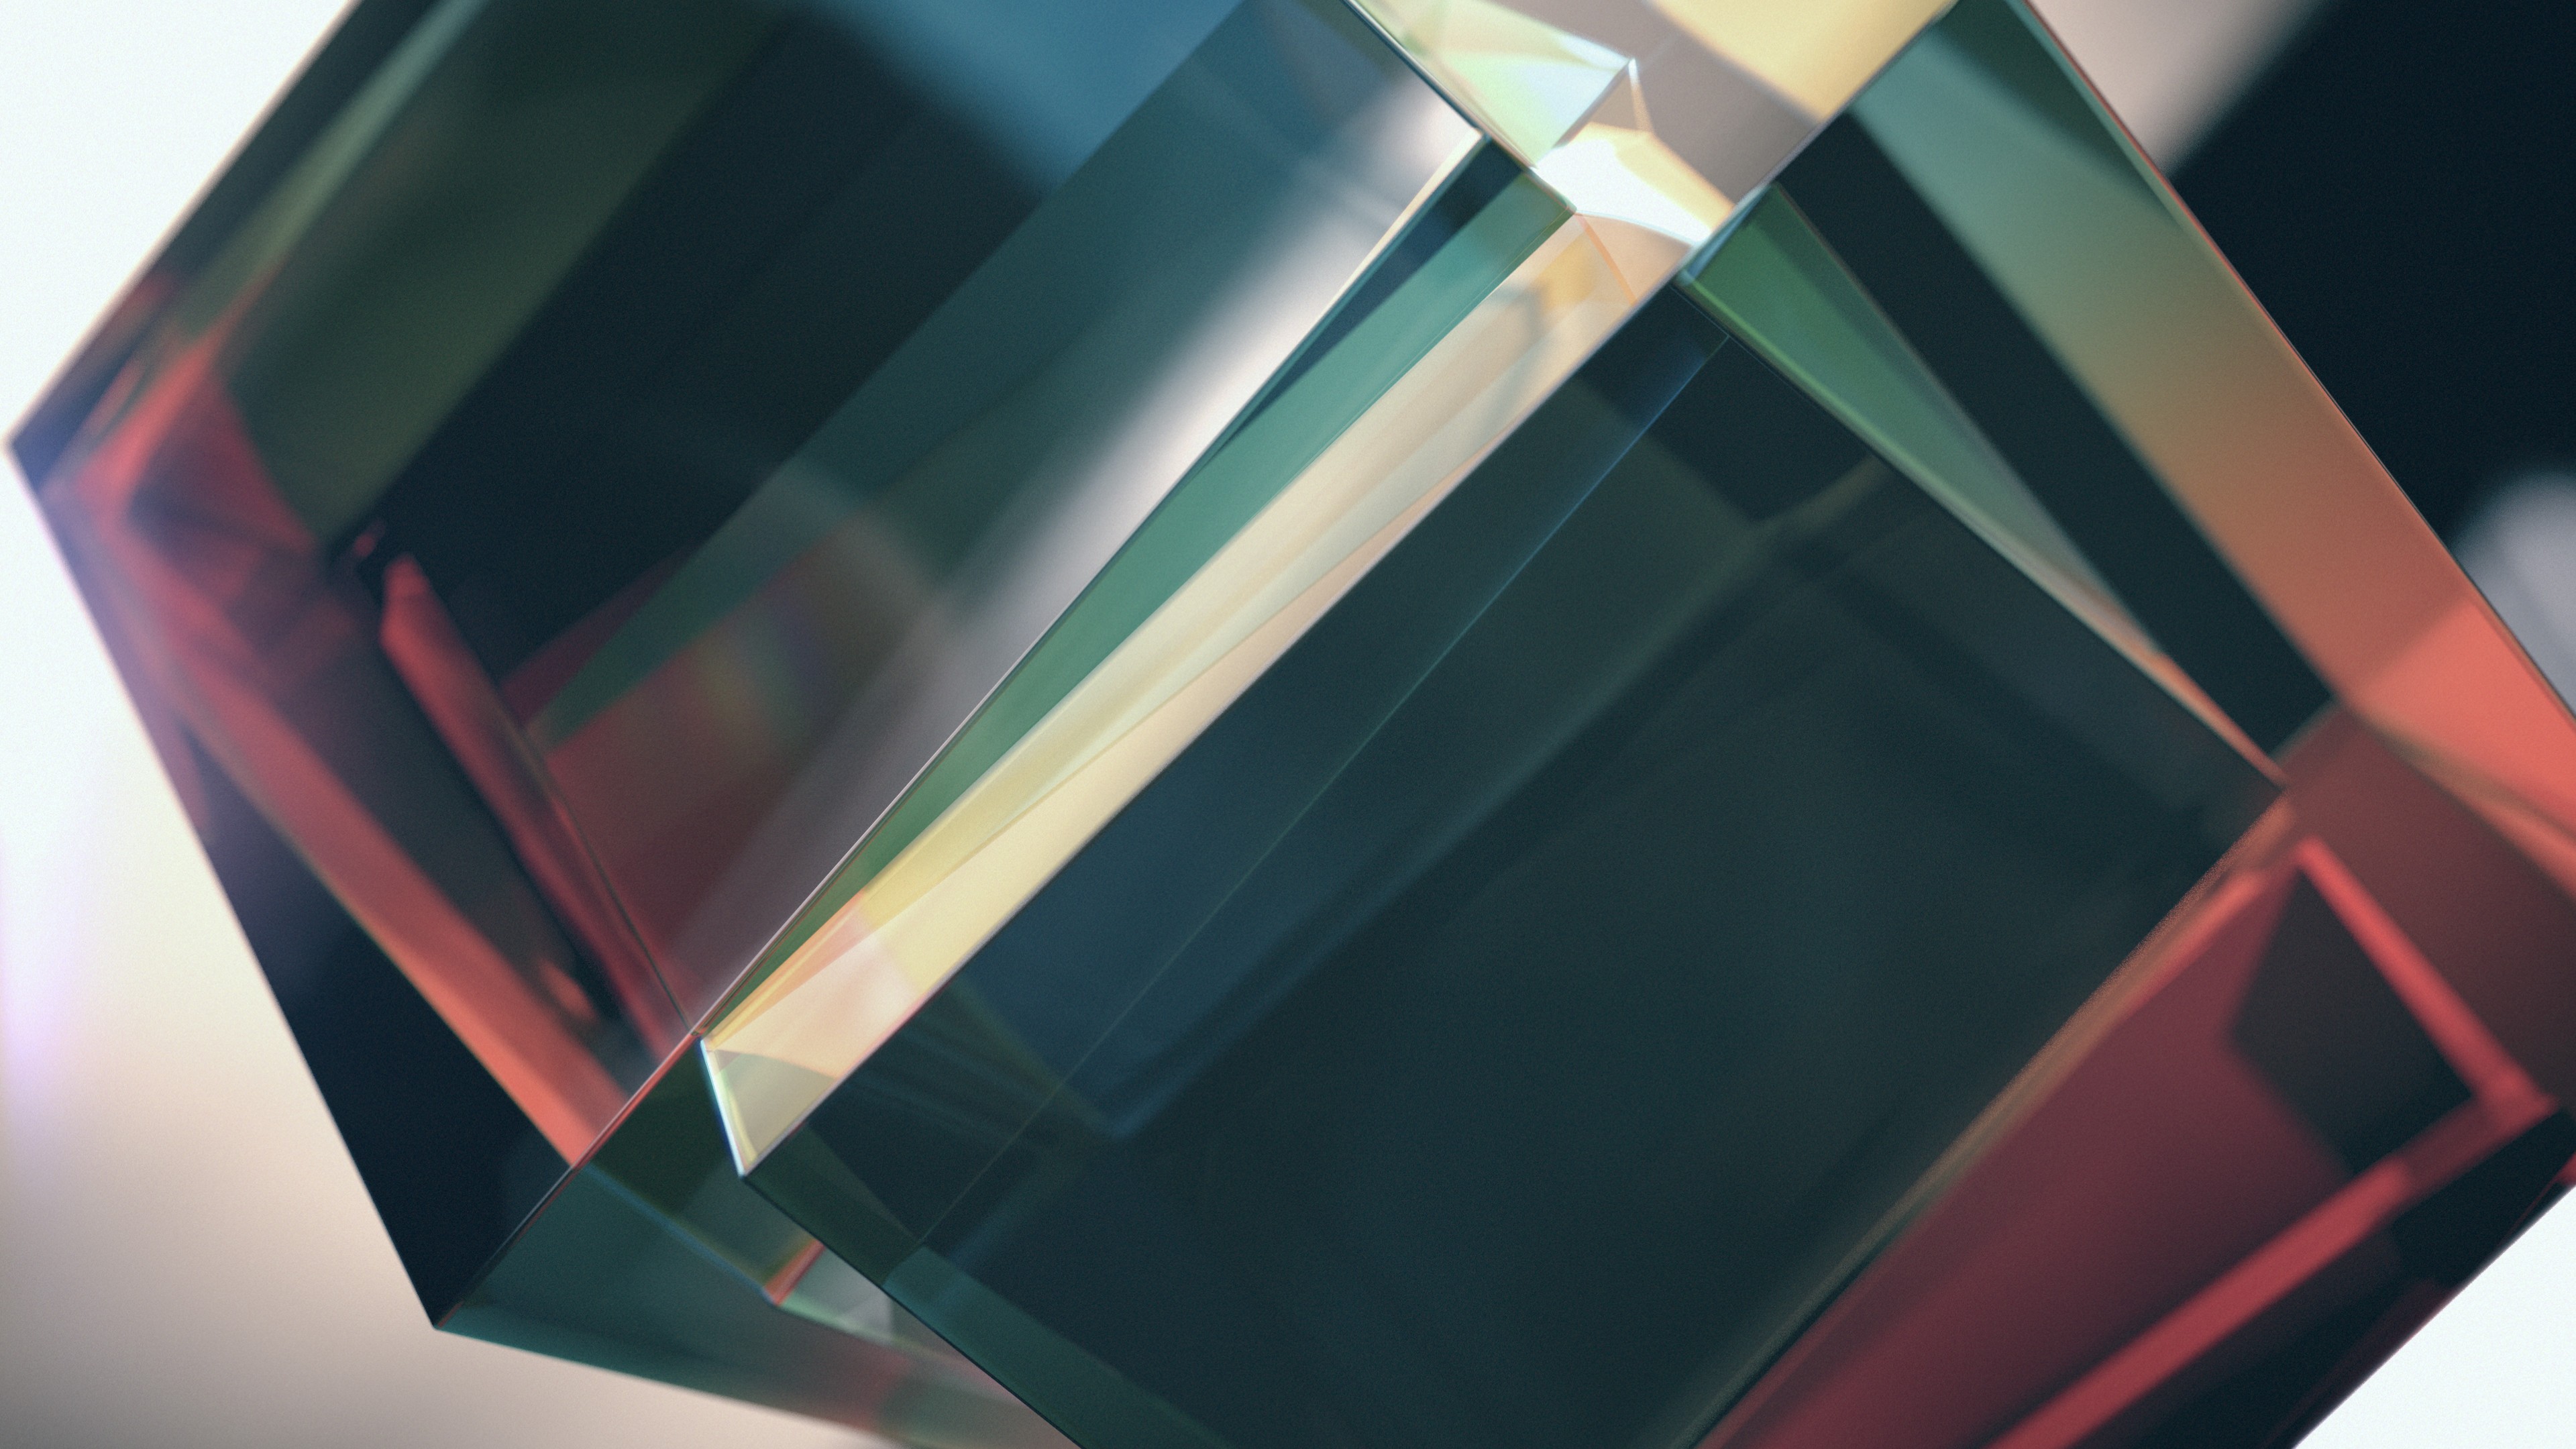 Cube Minimalism Abstract Prism 3840x2160